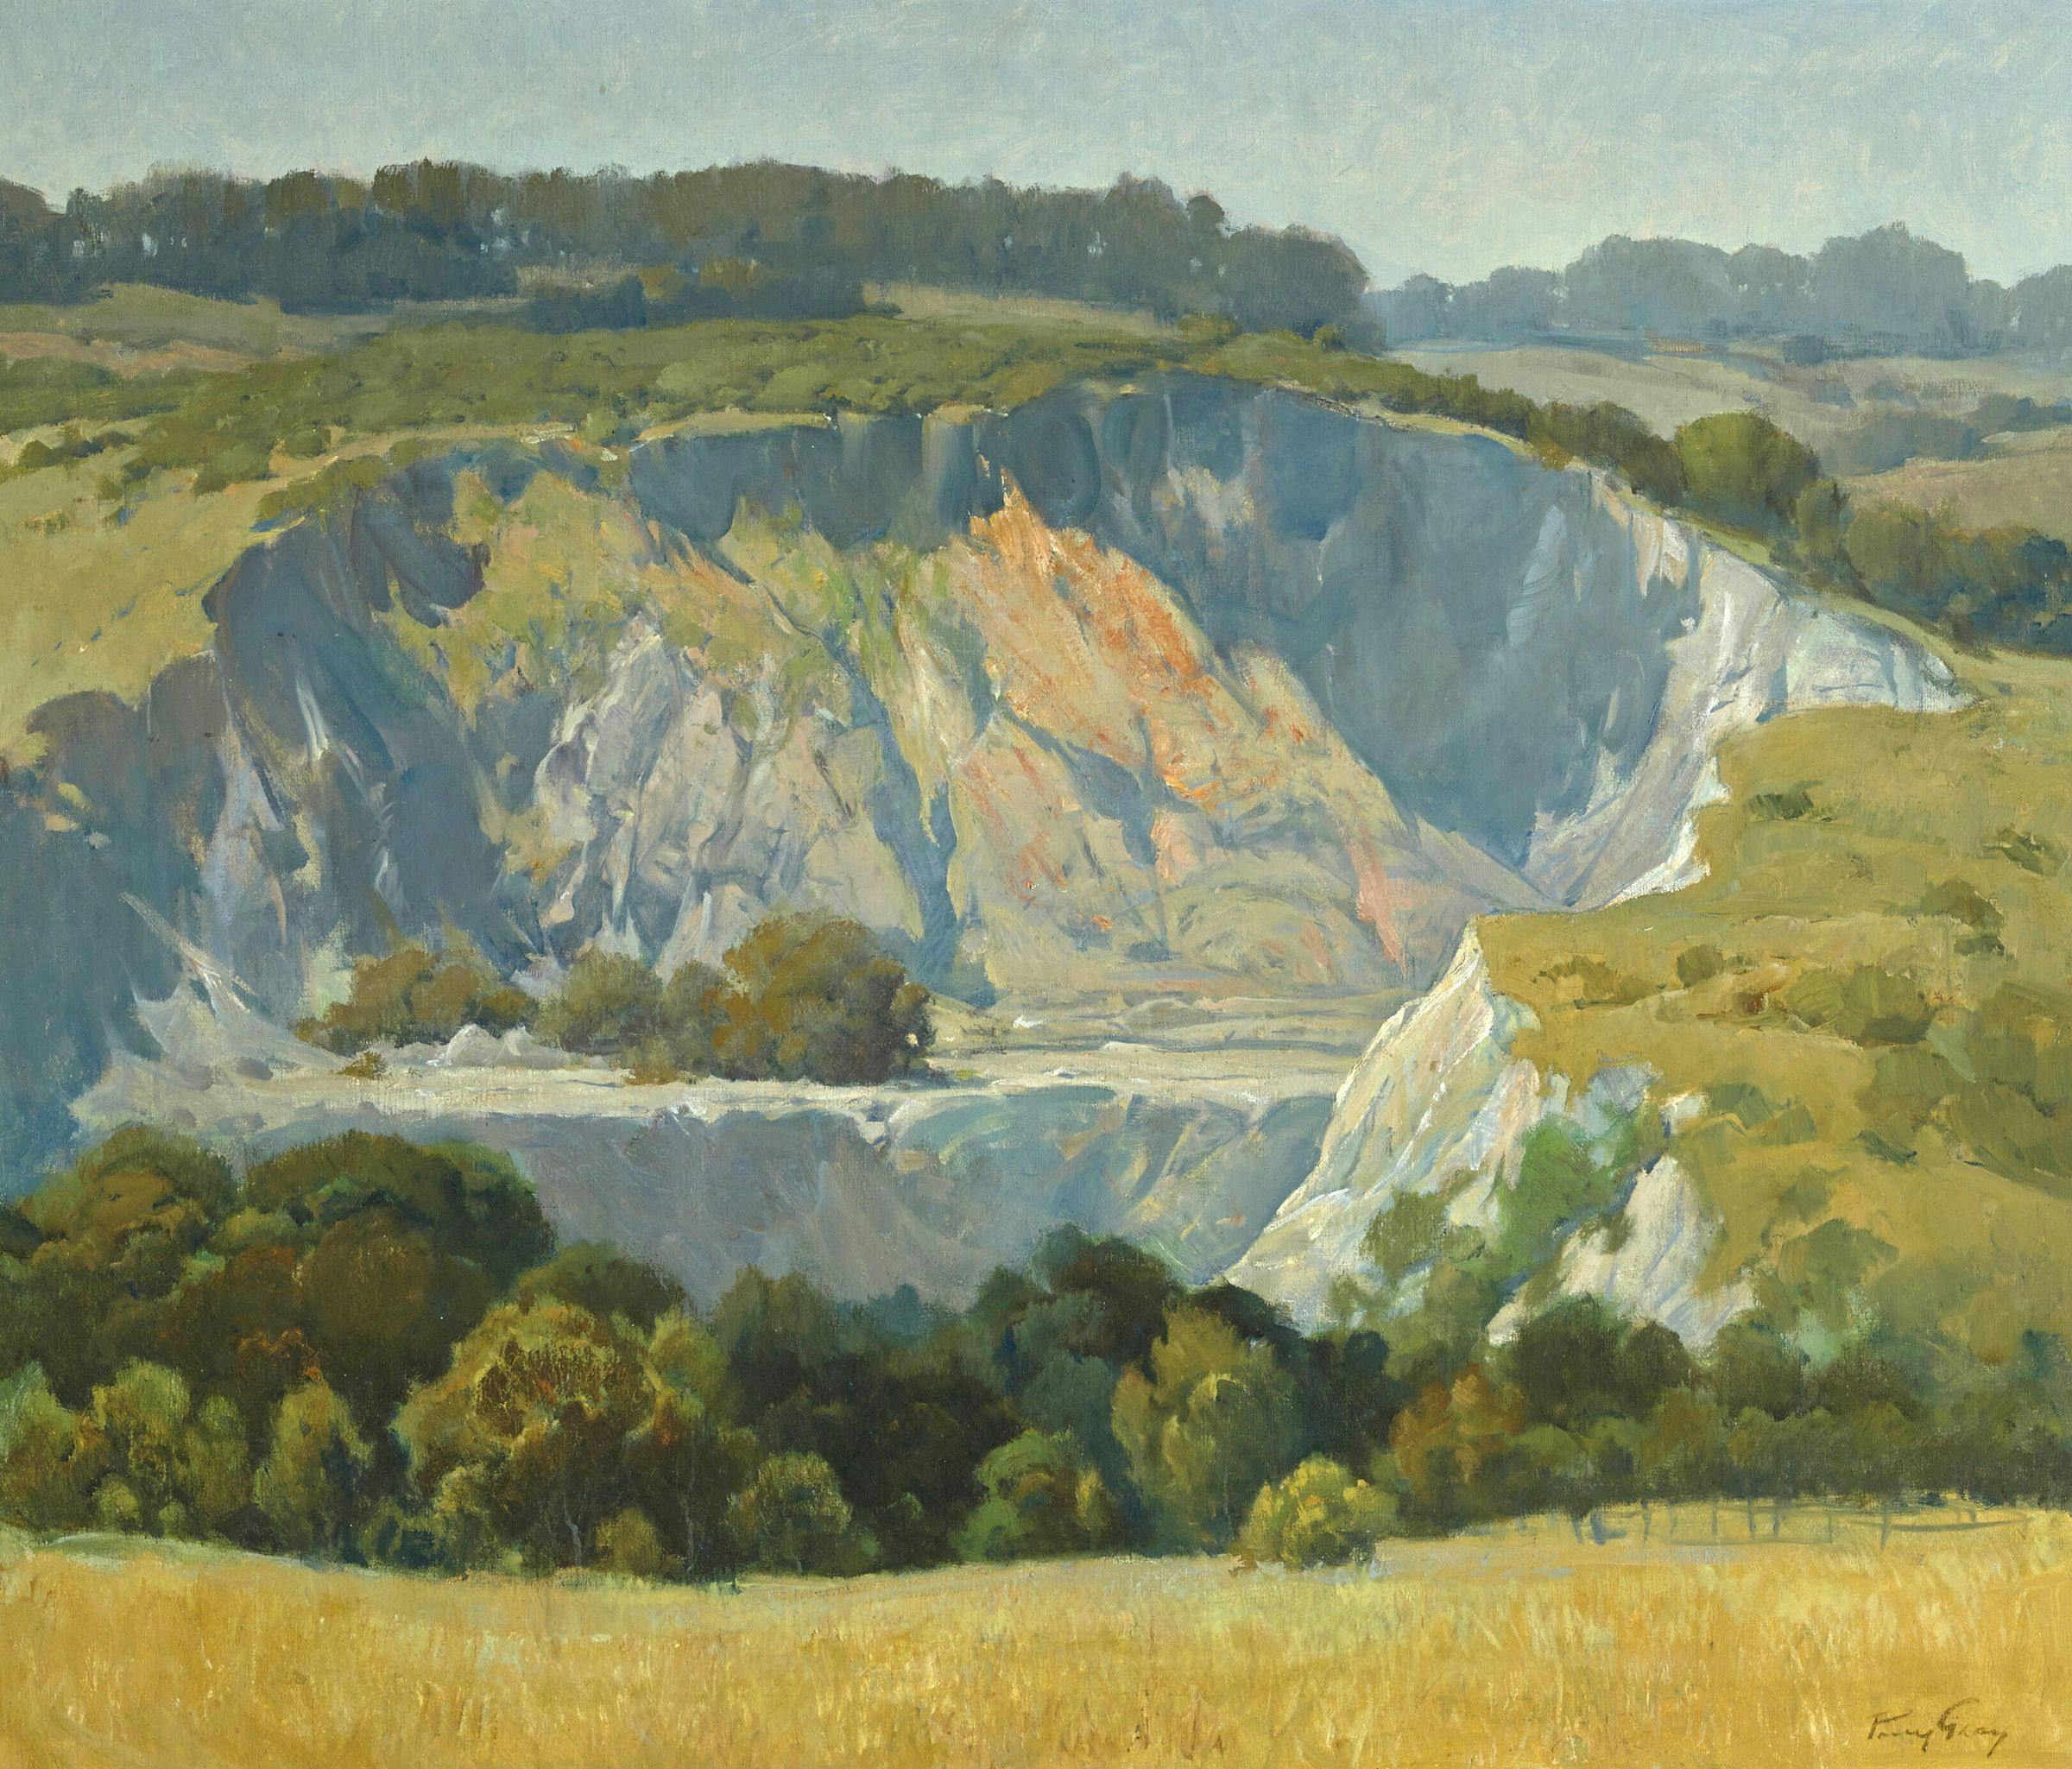 An Old Quarry
Percy  Gray 
20th Century,21st Century
2013.34